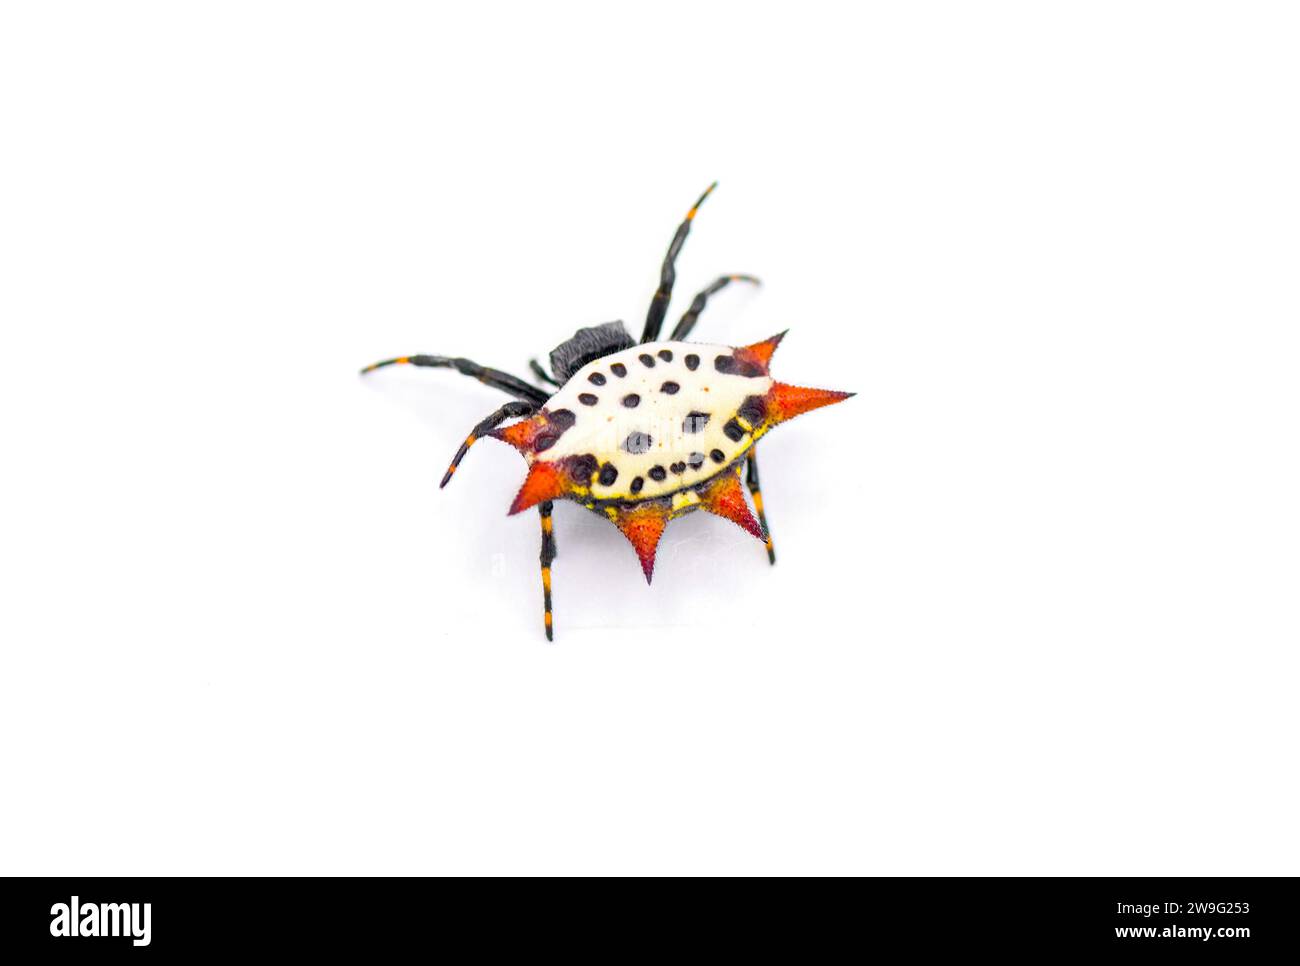 Spiny backed orb weaver spider - Gasteracantha cancriformis - aka crab or kite spider crawling away from camera back side view isolated on white backg Stock Photo